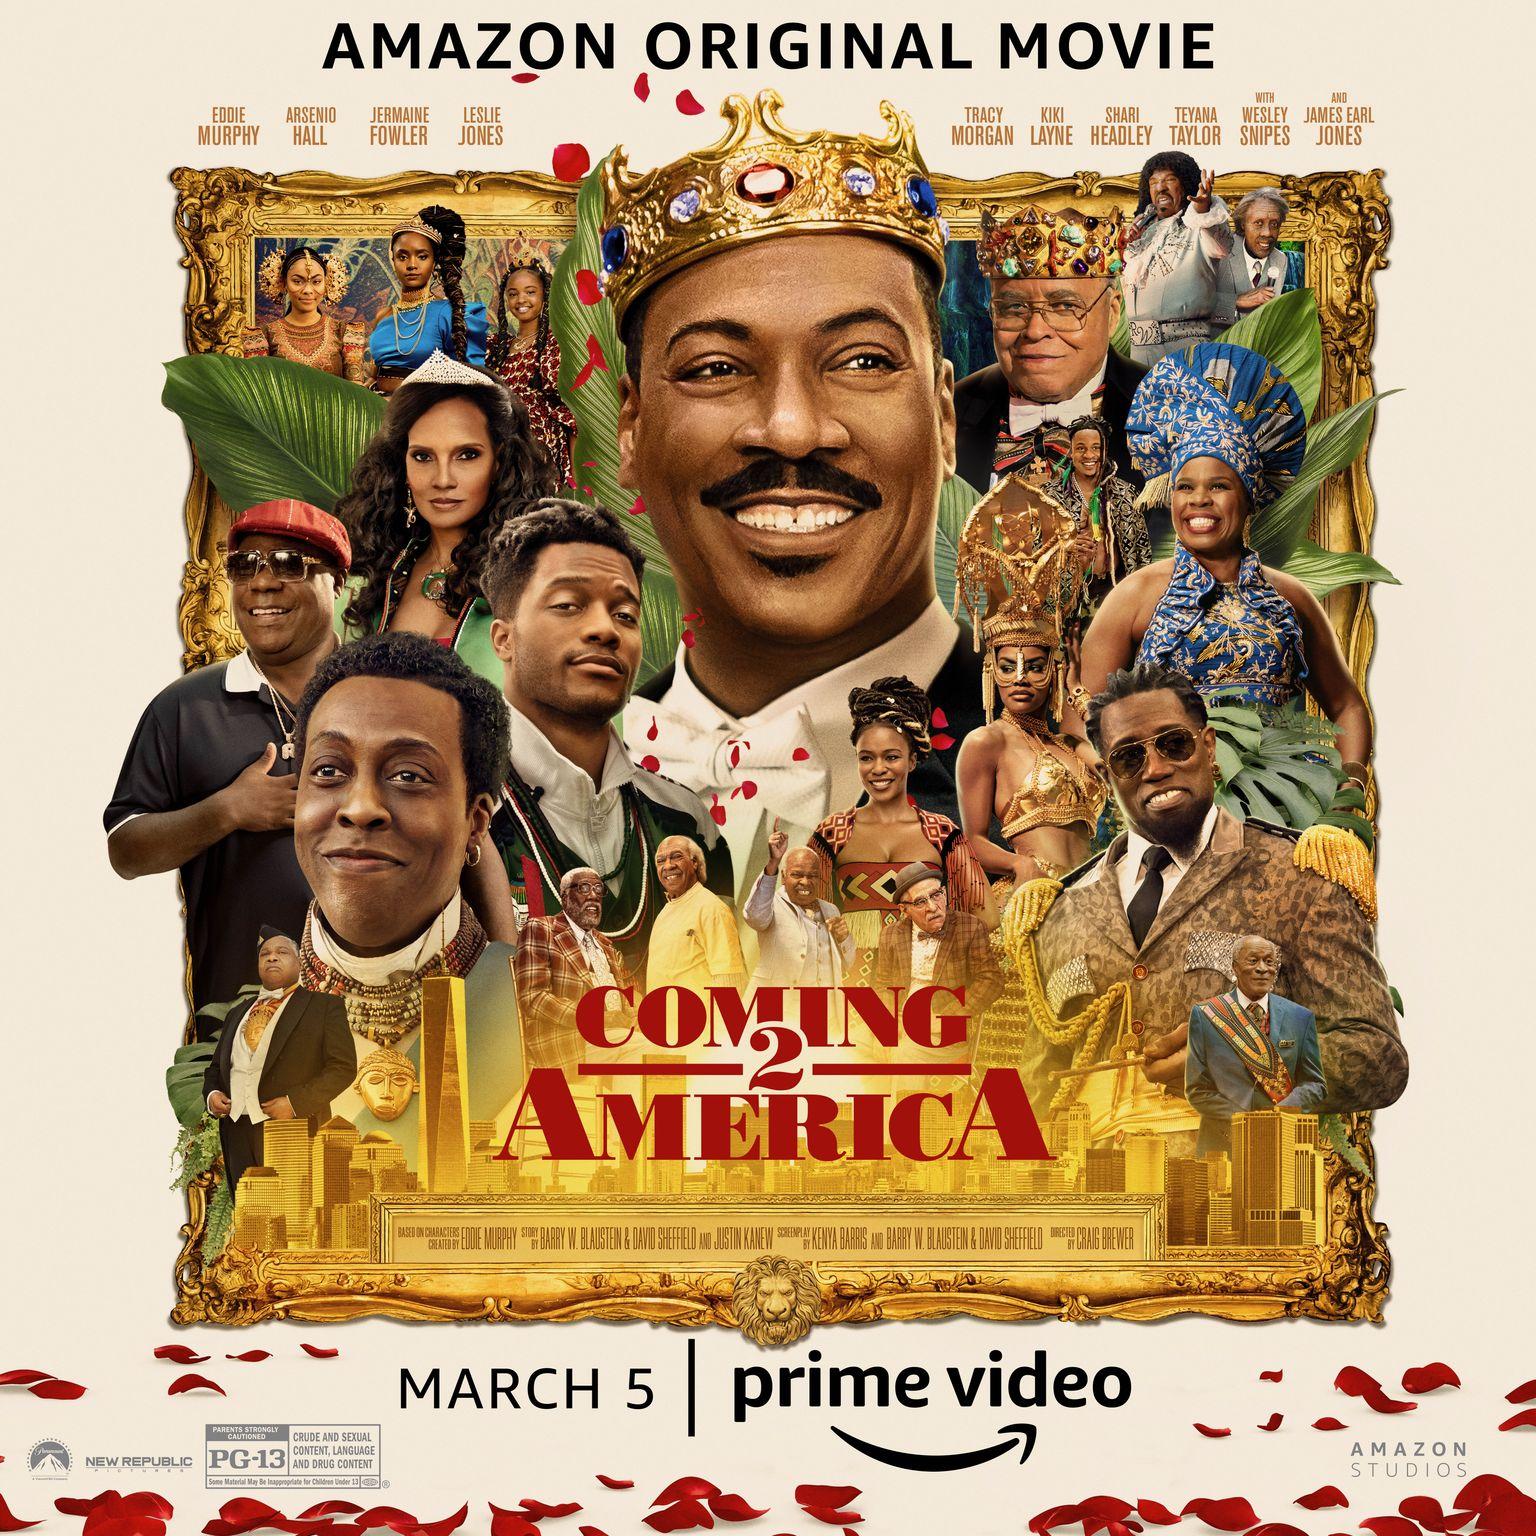 Blockbuster 2 America" Official Trailer & Poster Released